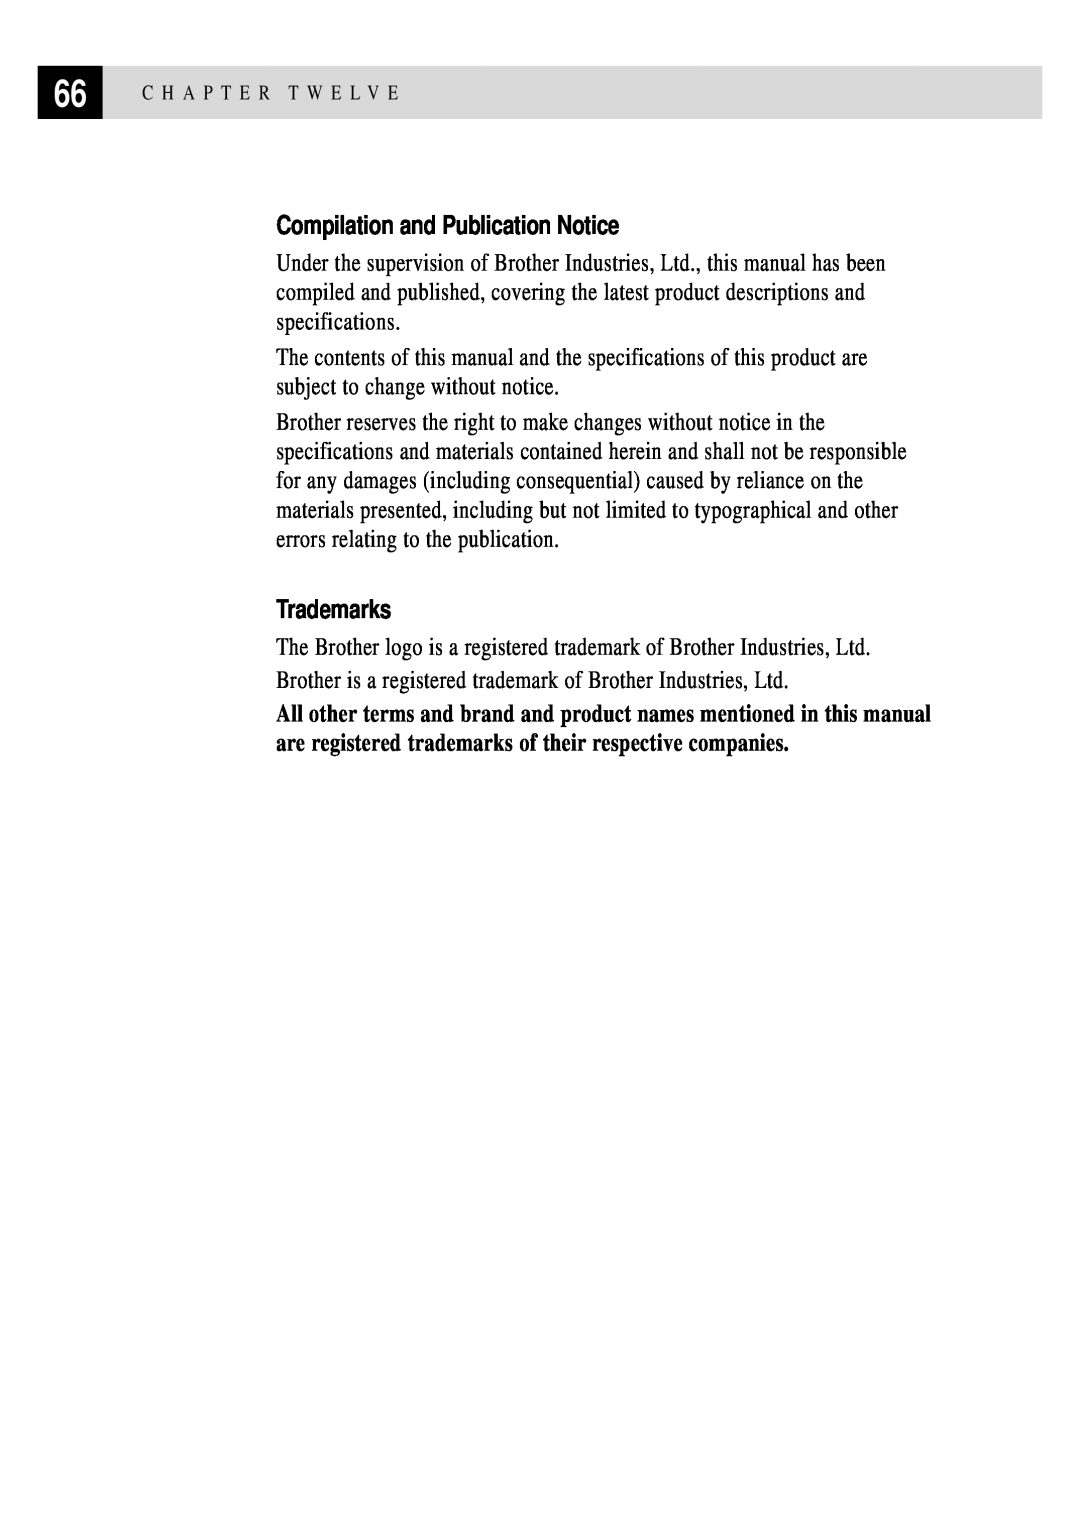 Brother FAX 255 owner manual Compilation and Publication Notice, Trademarks 